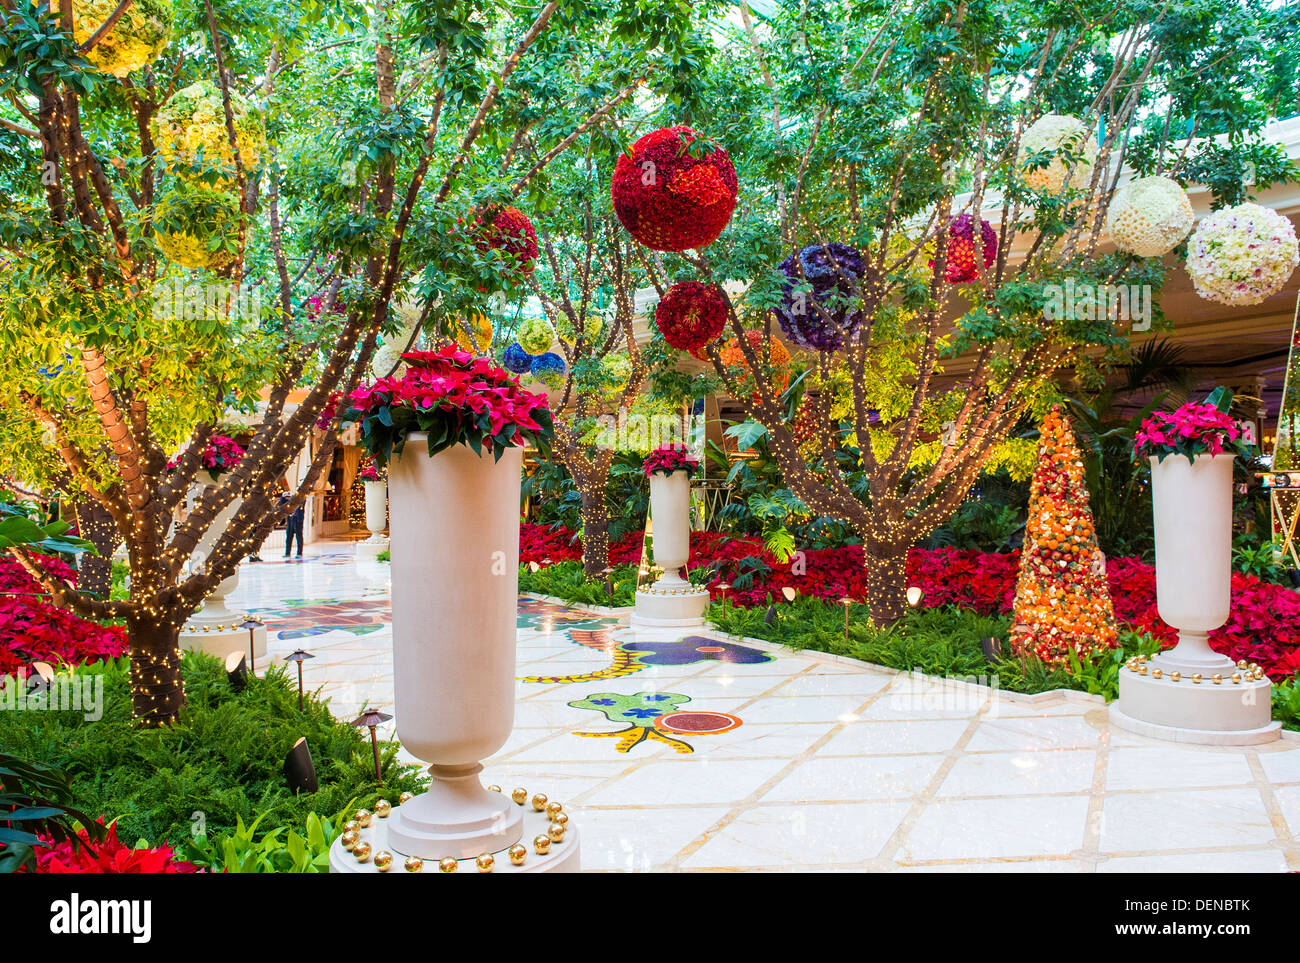 The the interior of Wynn Hotel and casino in Las Vegas. Stock Photo